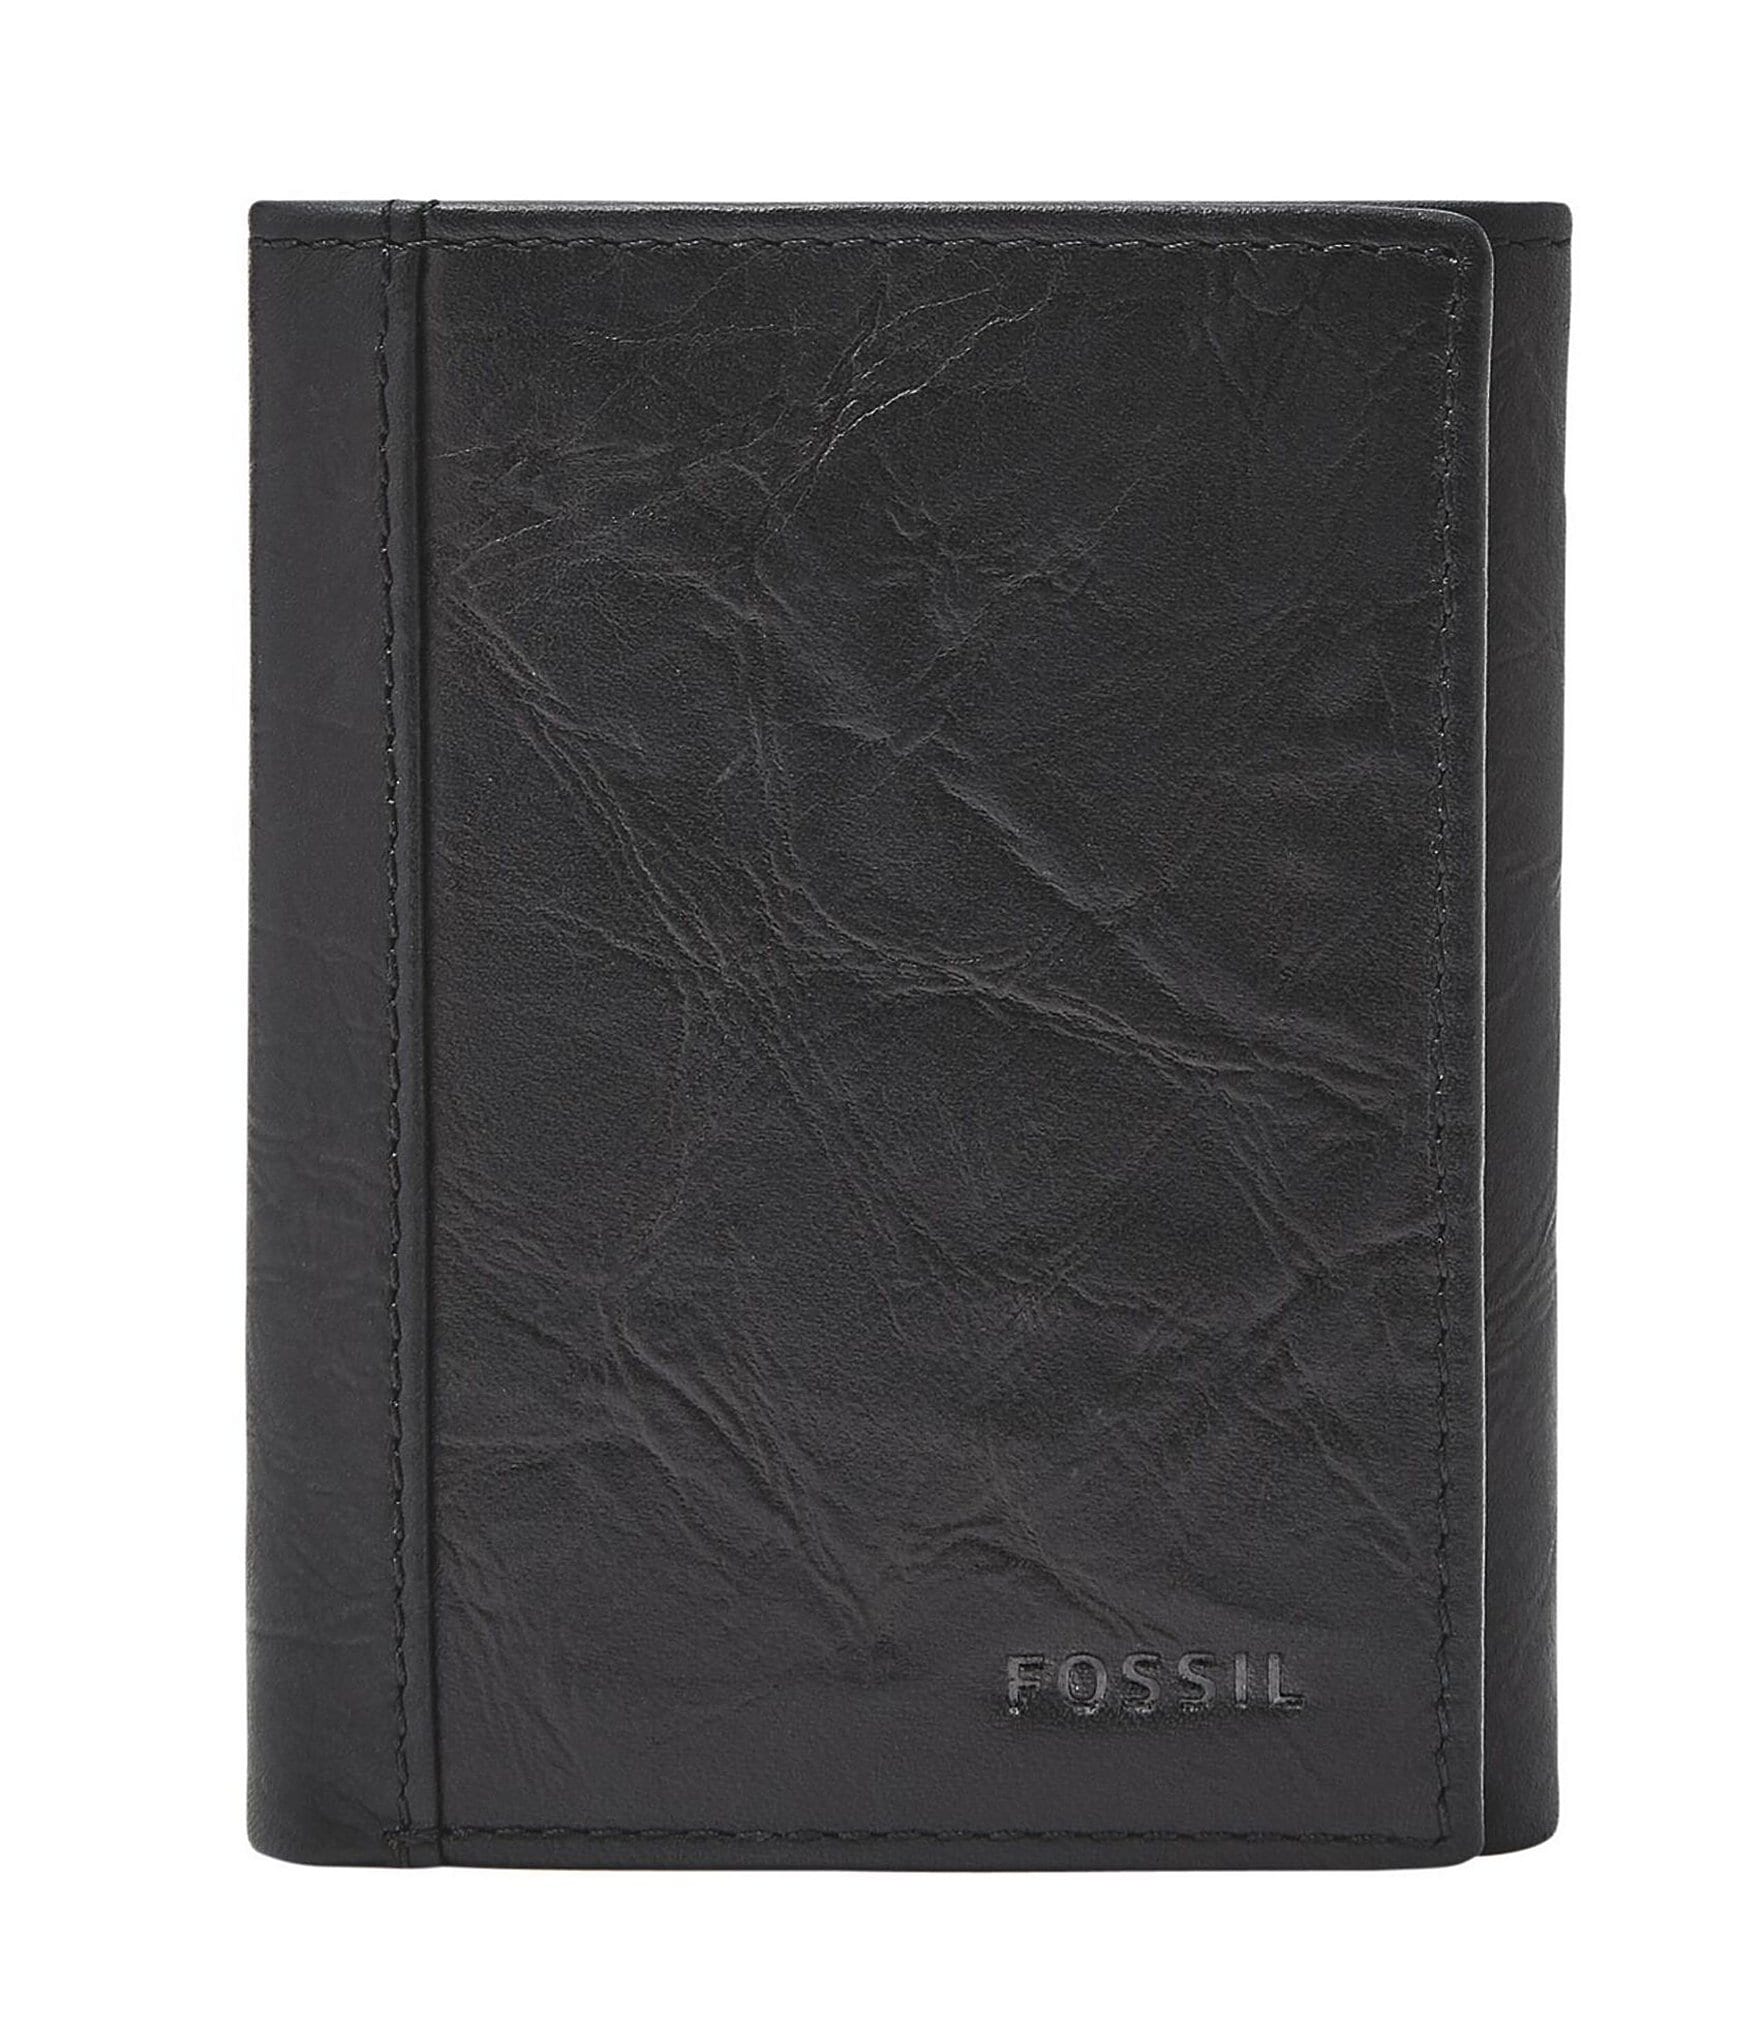 Men's Trifold Wallets - Fossil US